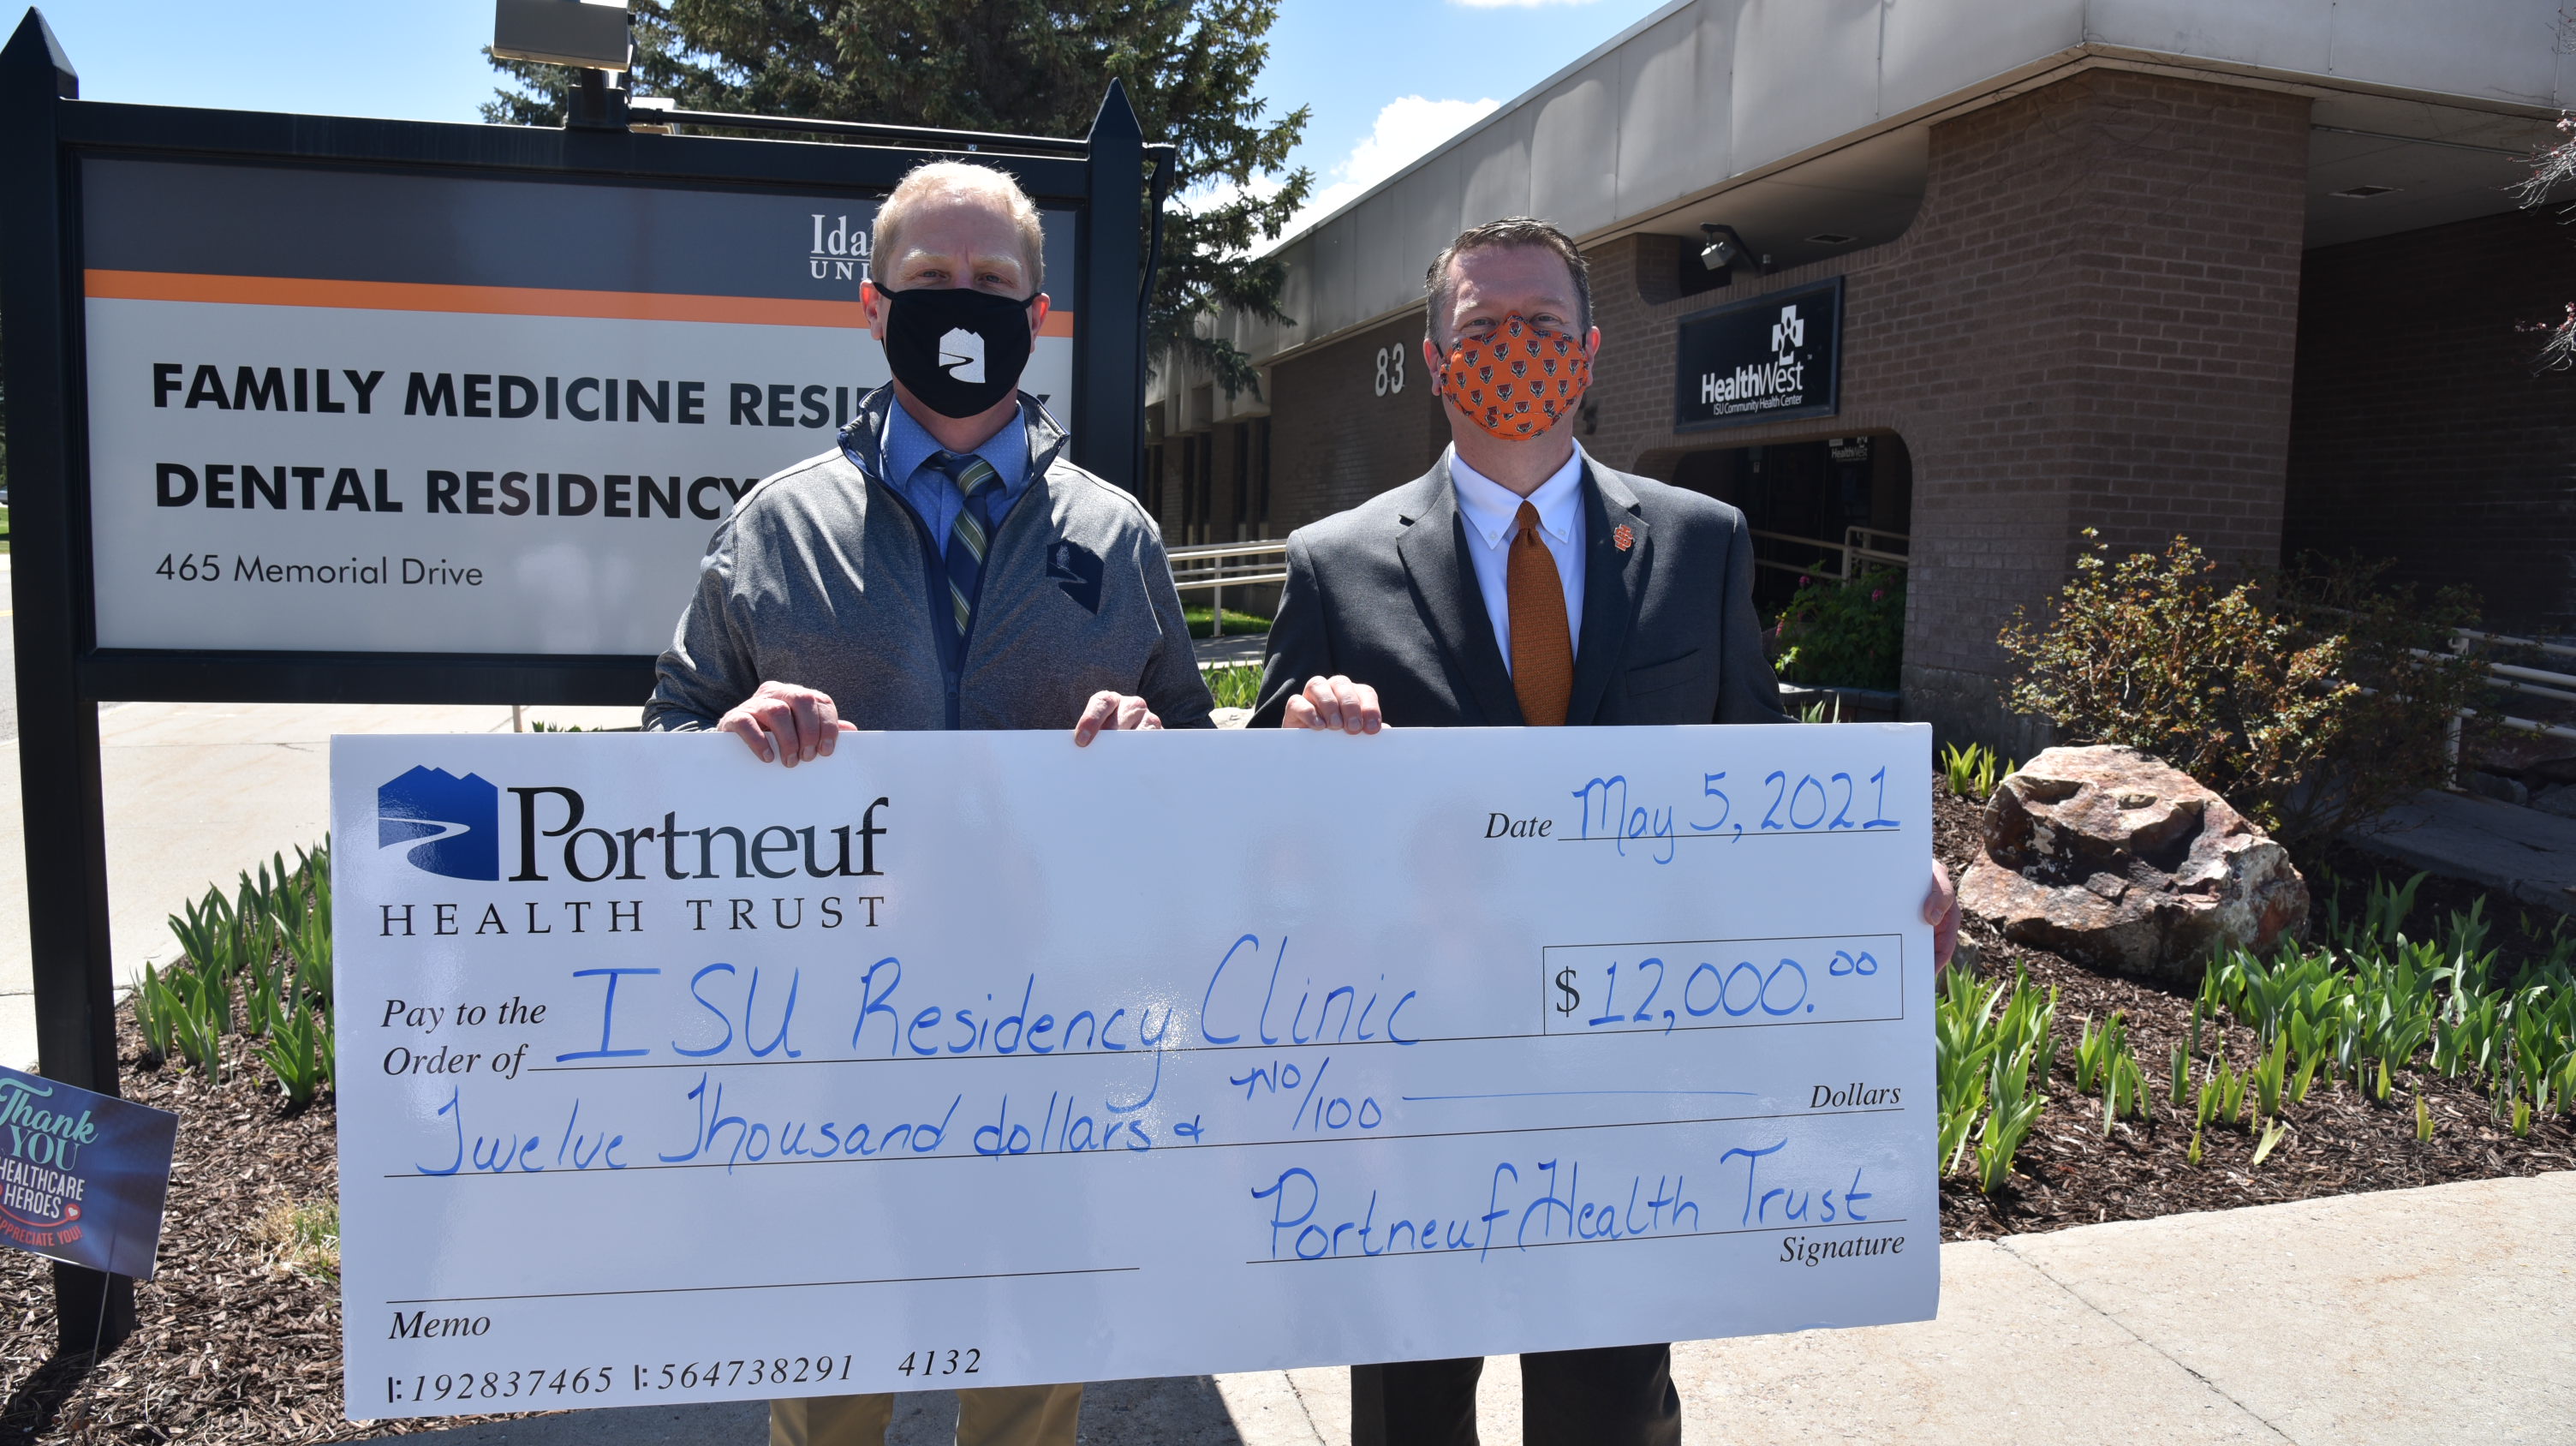 ISU President Kevin Satterlee with Portneuf Health Trust CEO Shaun Menchaca outside Health West ISU with large check for $12,000 donated by Portneuf Health Trust